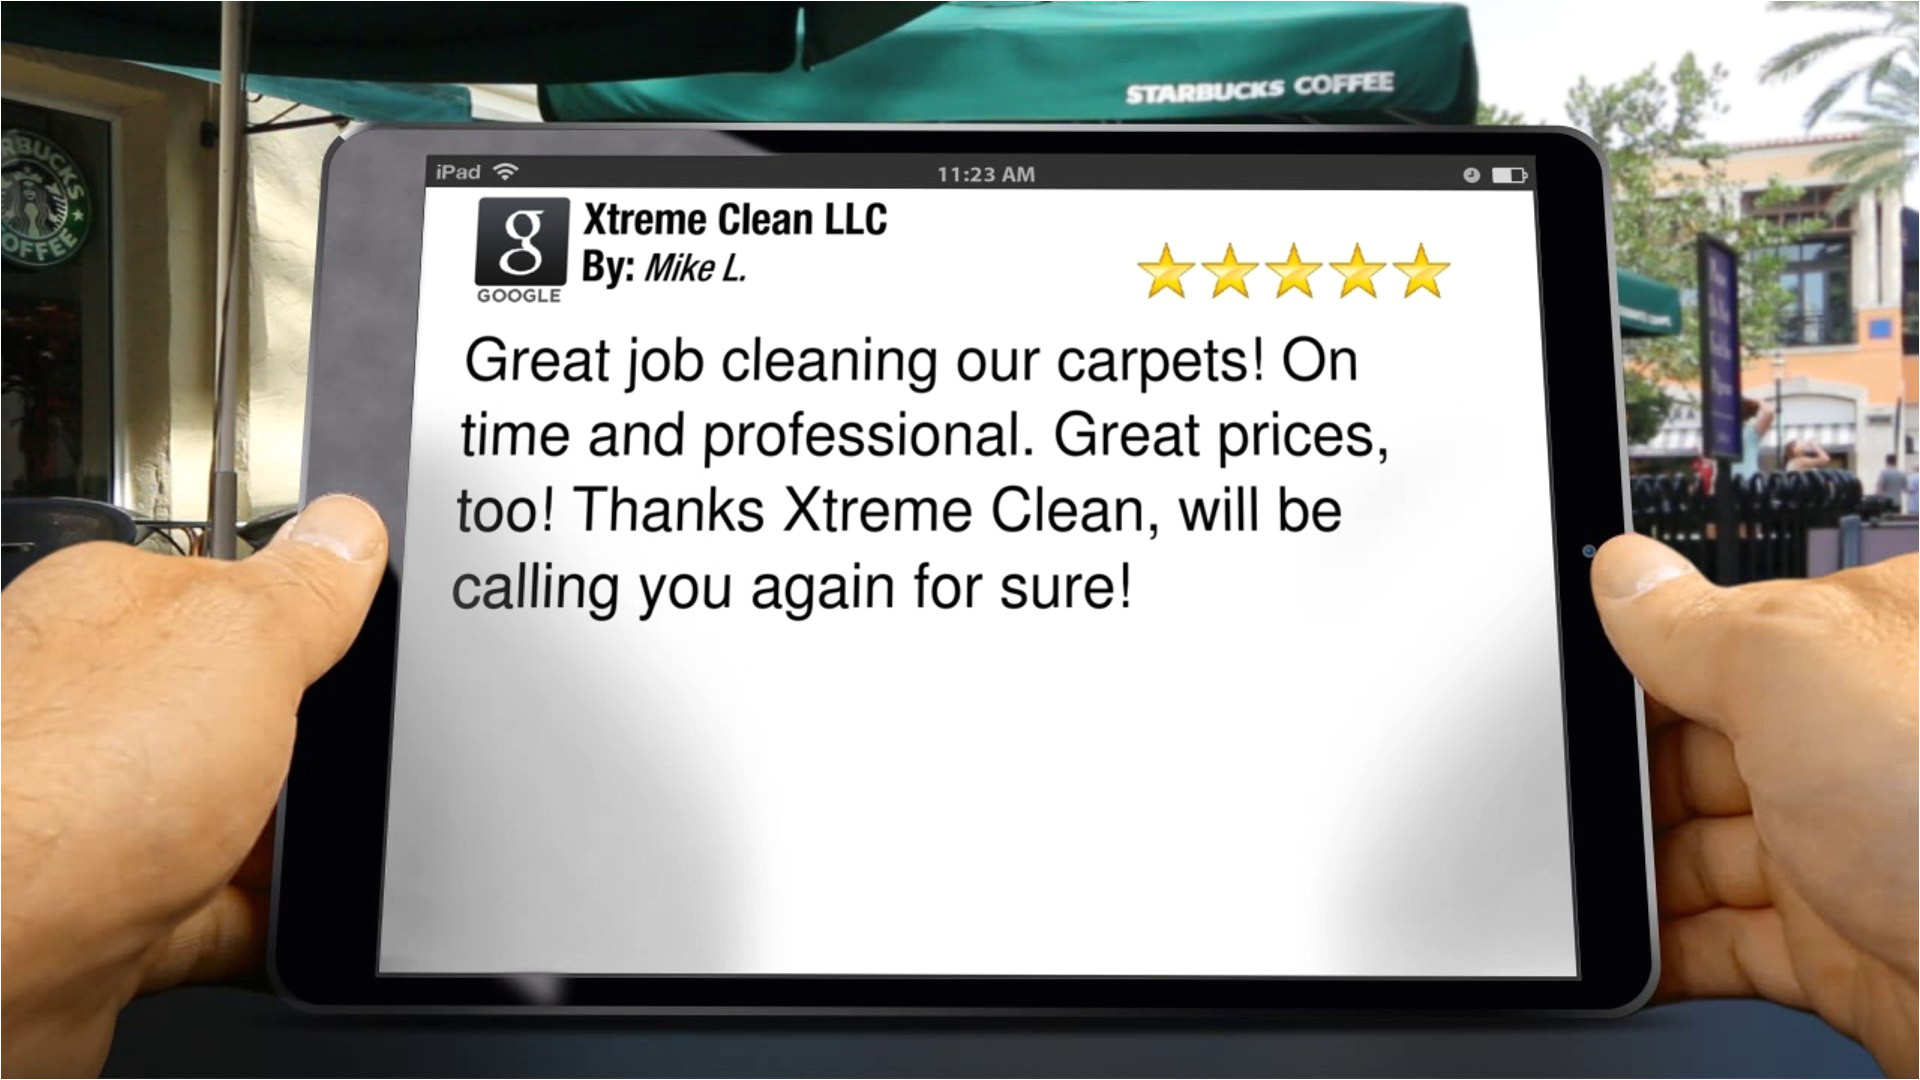 xtreme clean llc albuquerquecarpet cleaning companyreceivesimpressive 5 star review by mike l video dailymotion